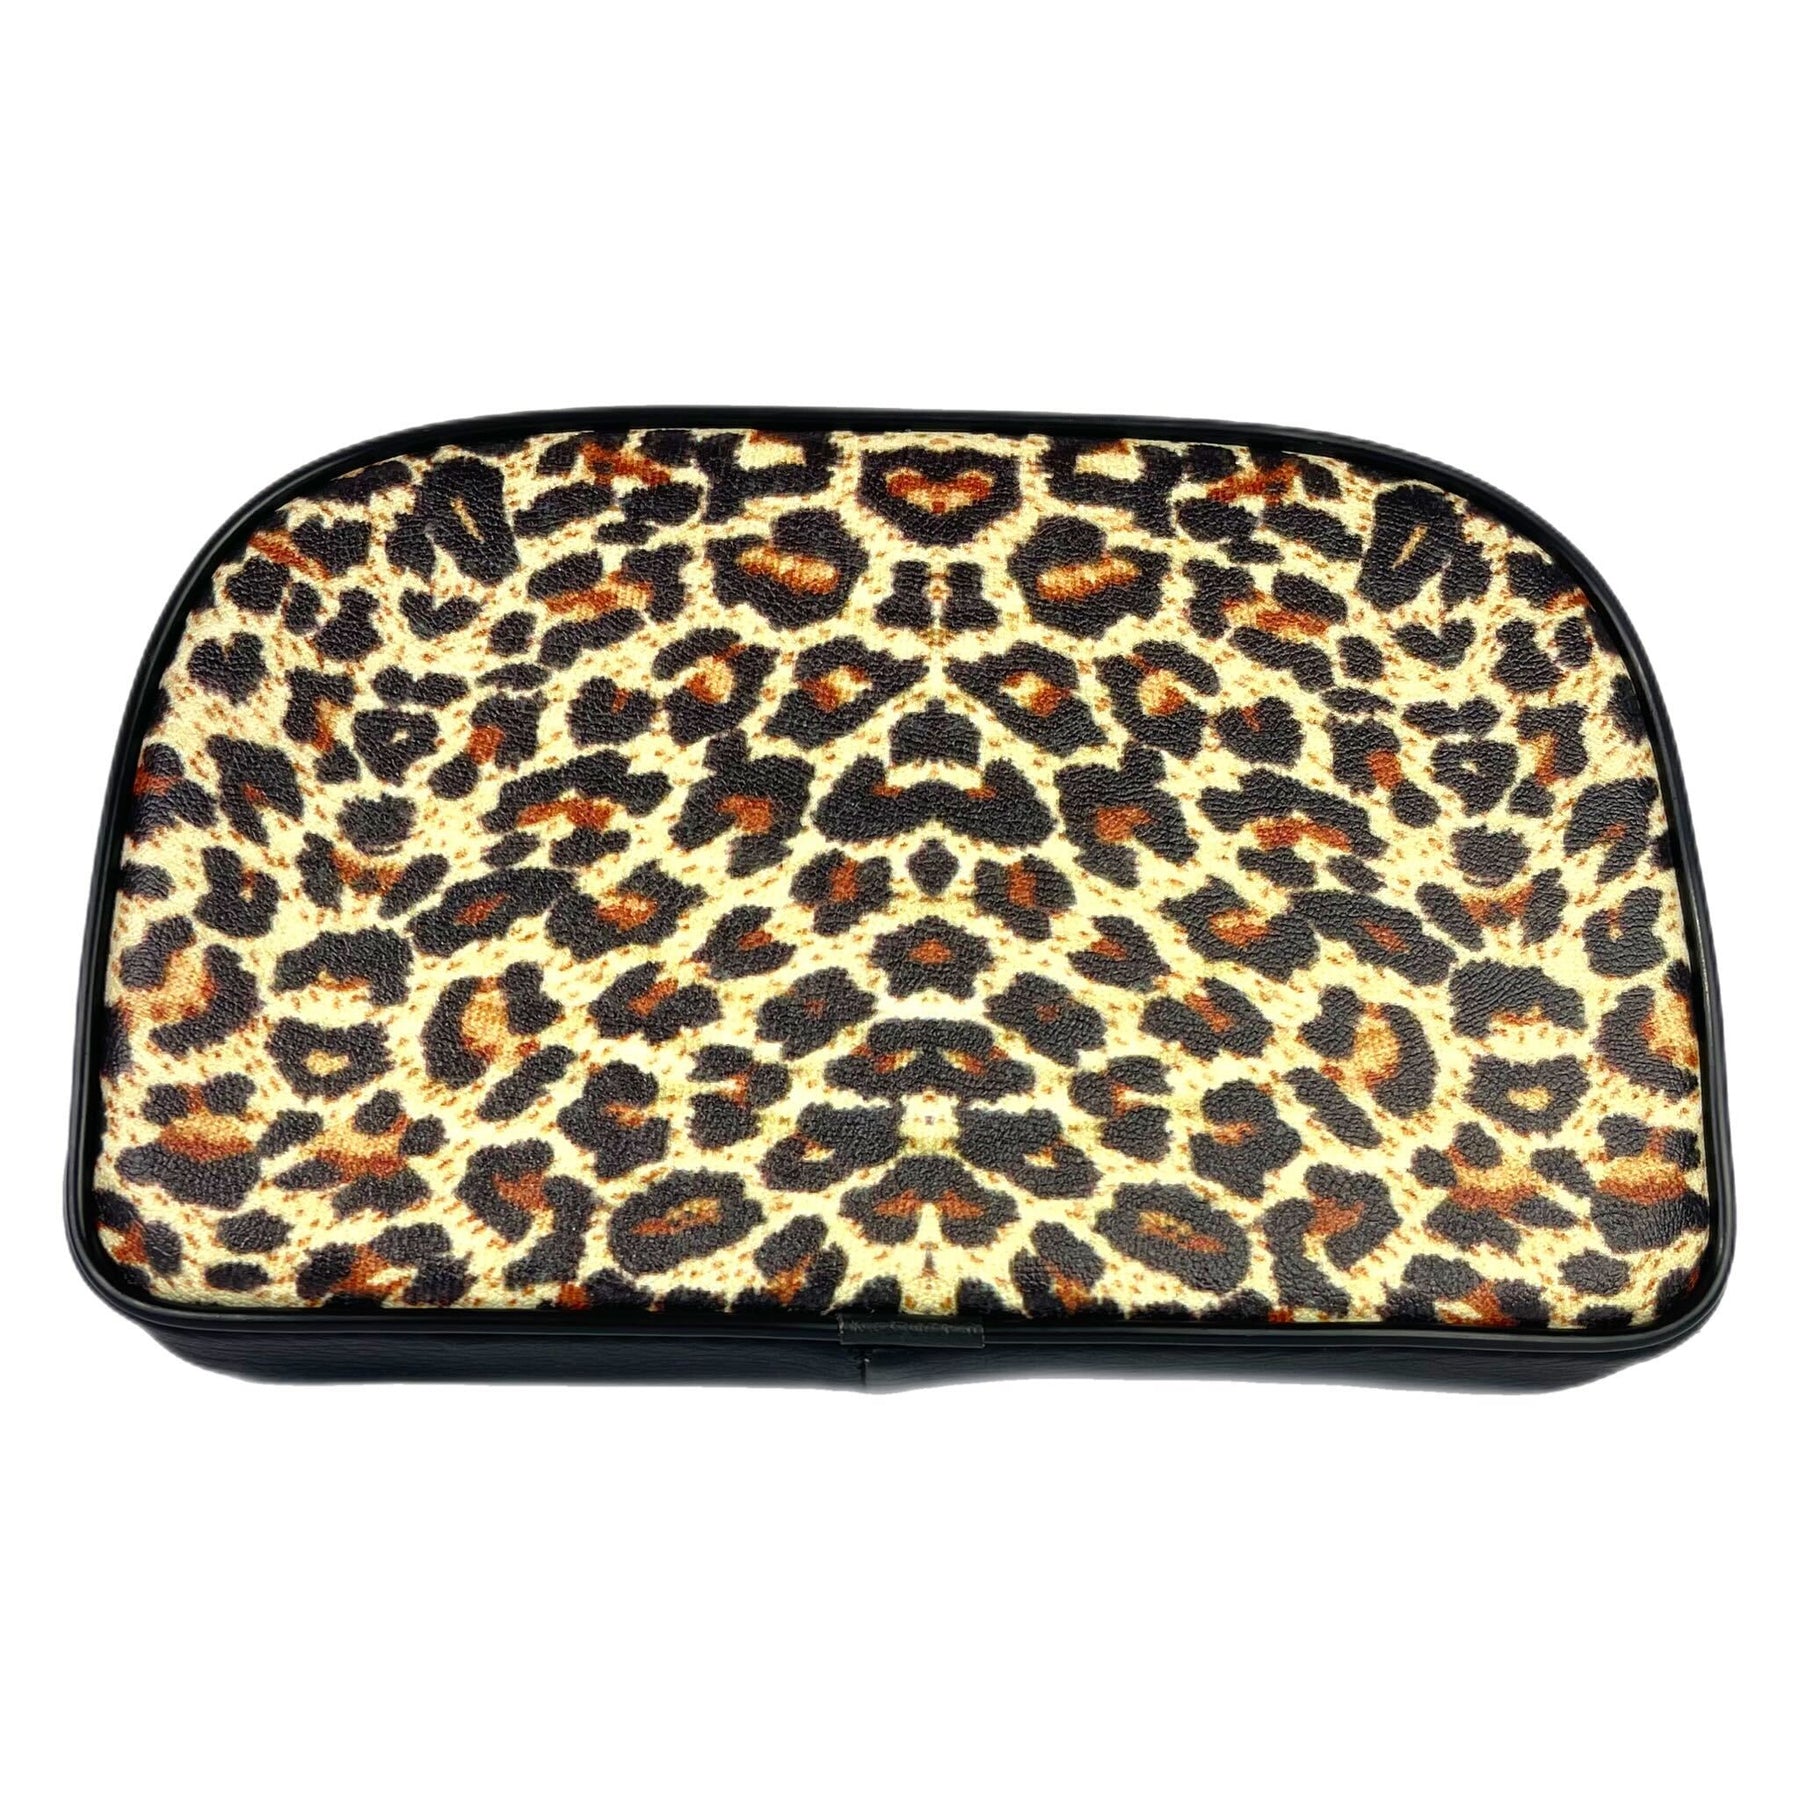 Vespa Lambretta Replacement Backrest Pad For 4 in 1 Stainless Carriers - Leopard Print